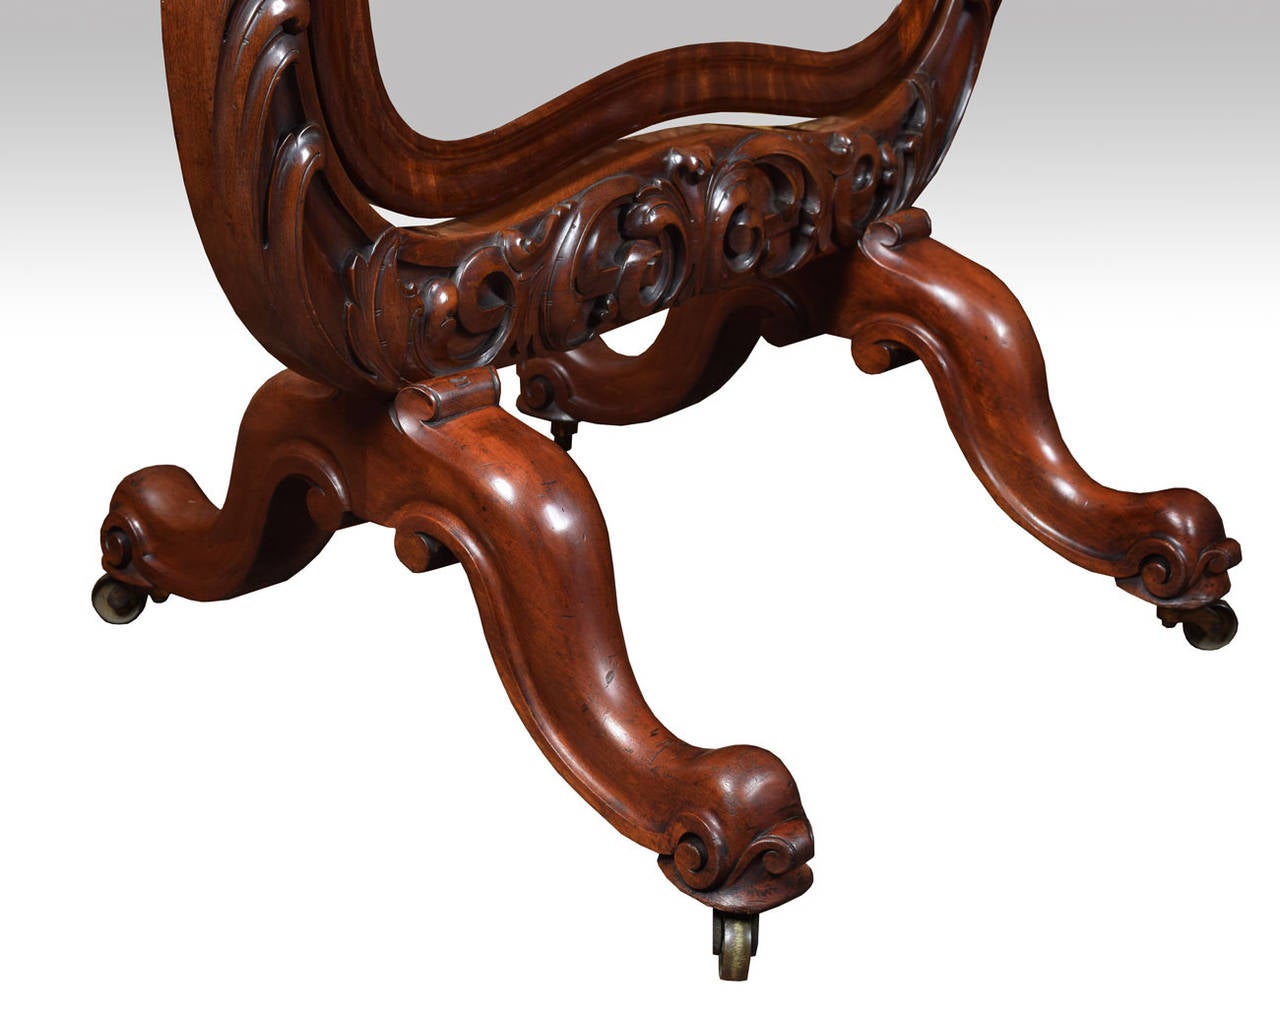 An early Victorian mahogany cheval mirror, the cartouche-shaped plate mirror, supported by a moulded frame having scrolled tendrils raised up on scrolled legs and brass cators.
Dimensions:
Height 67.5 inches
Width 36 inches
Depth 25.5 inches.